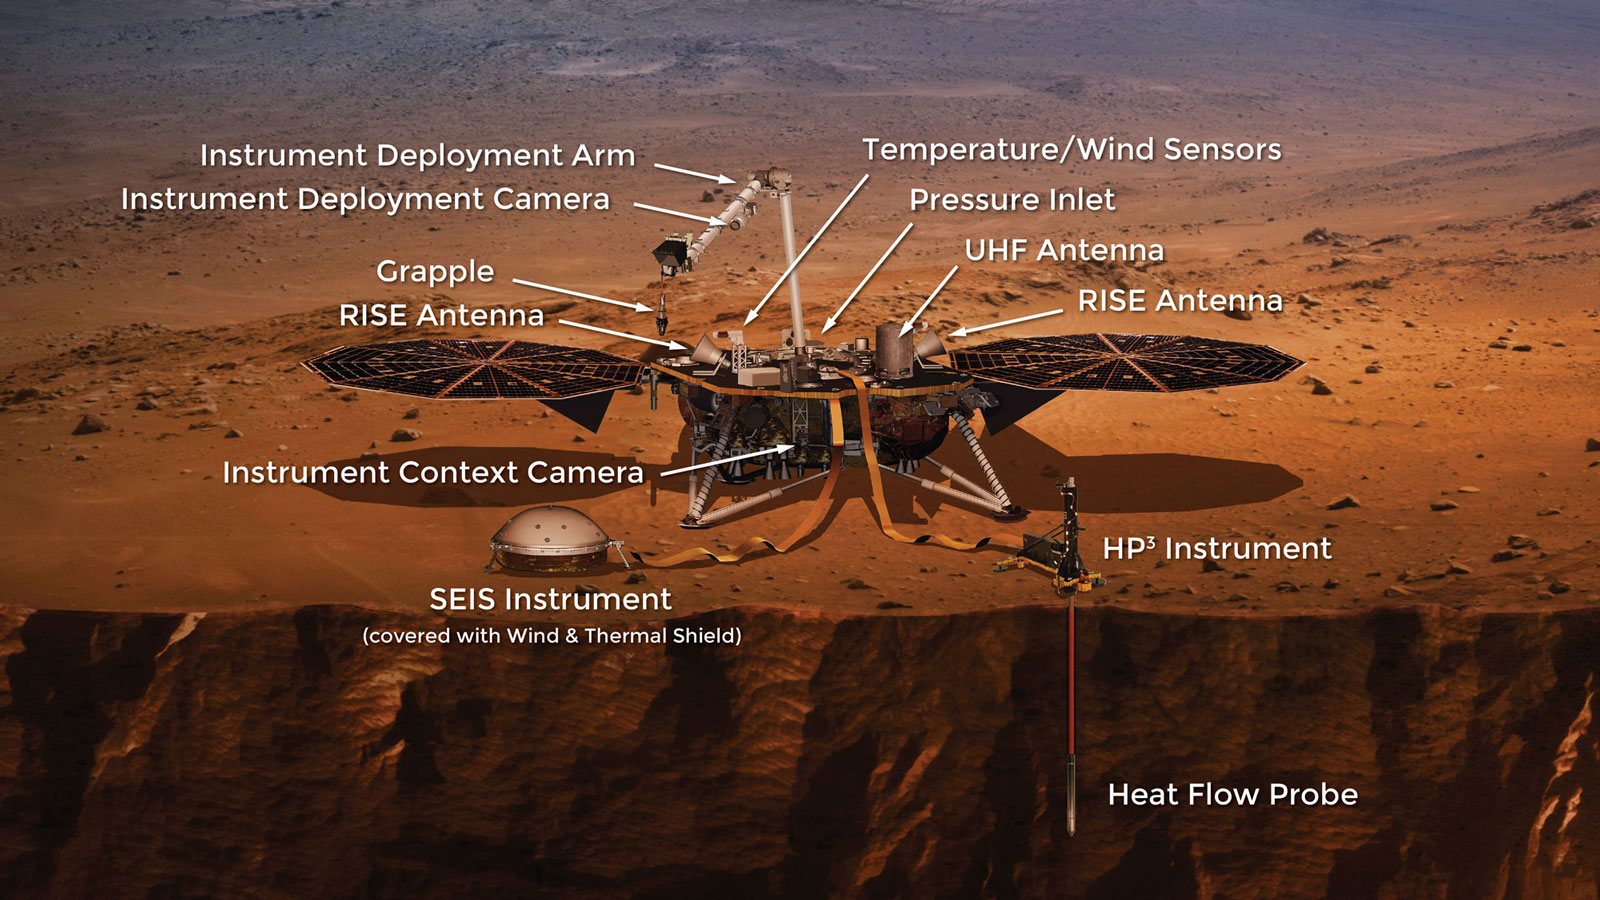 This illustration of the InSight lander on Mars shows the location of its science instruments, including a drill to explore below the surface.